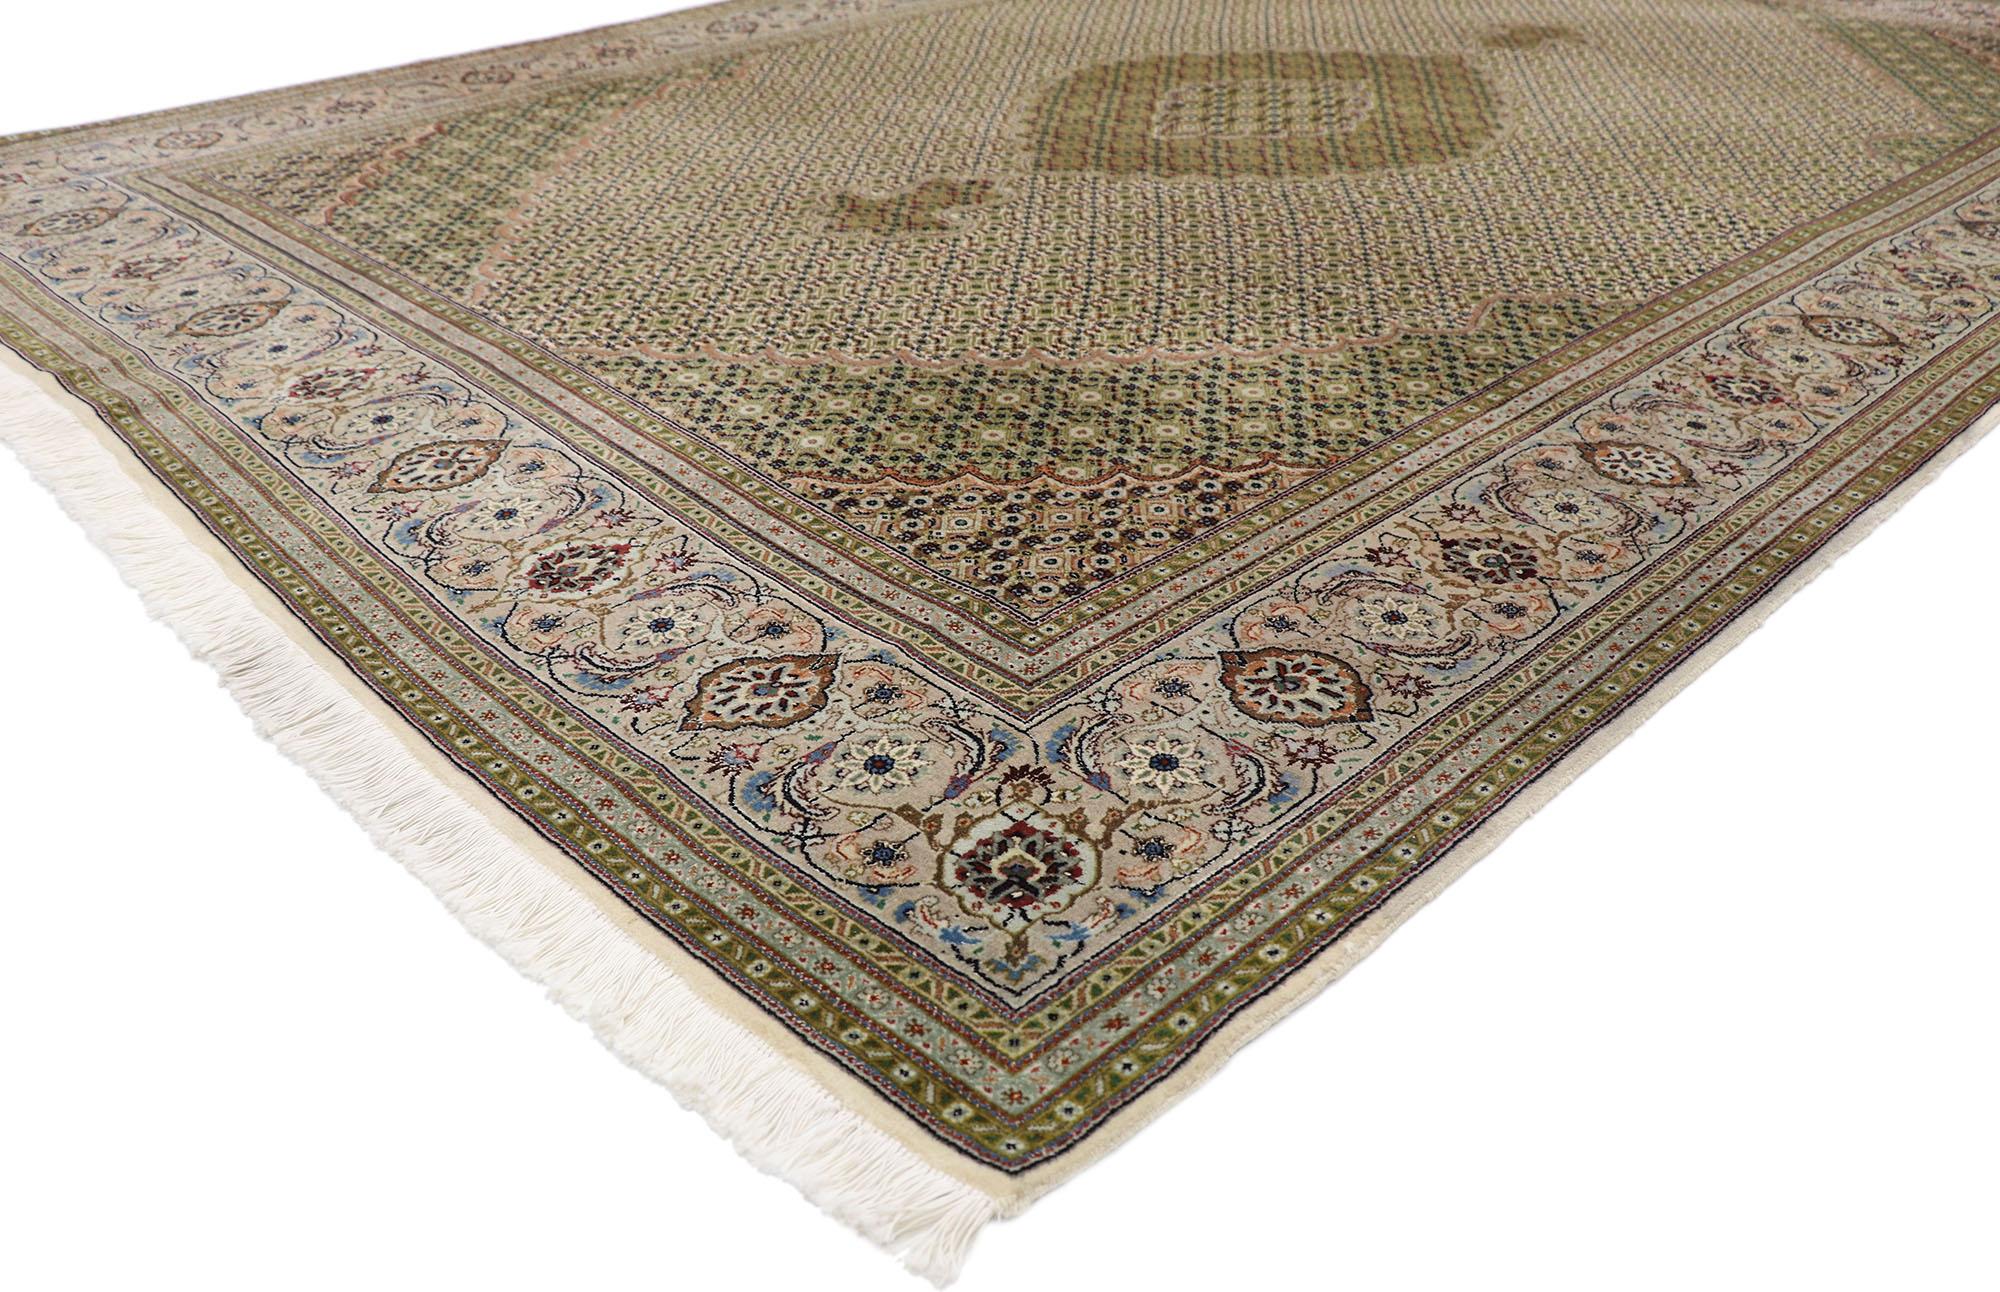 77792 Vintage Persian Mahi Tabriz rug with Neoclassical Victorian Style 06'07 x 09'10. With ornate details and well-balanced symmetry, this hand-knotted wool vintage Persian Mahi Tabriz rug is poised to impress. The medallion is filled with and